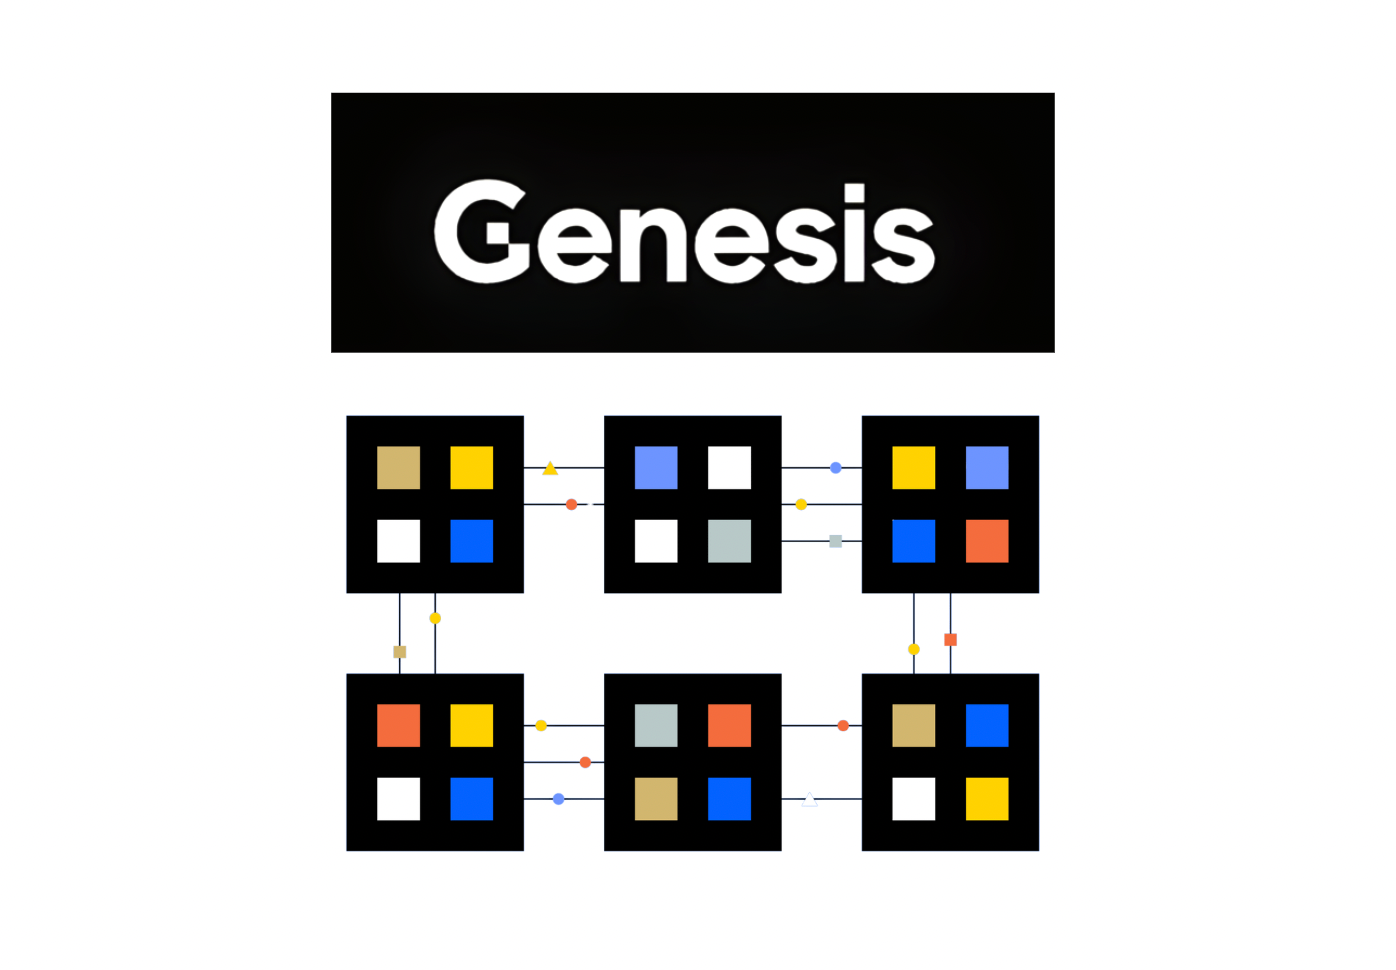 Inside Genesis - Deleverage till the music plays